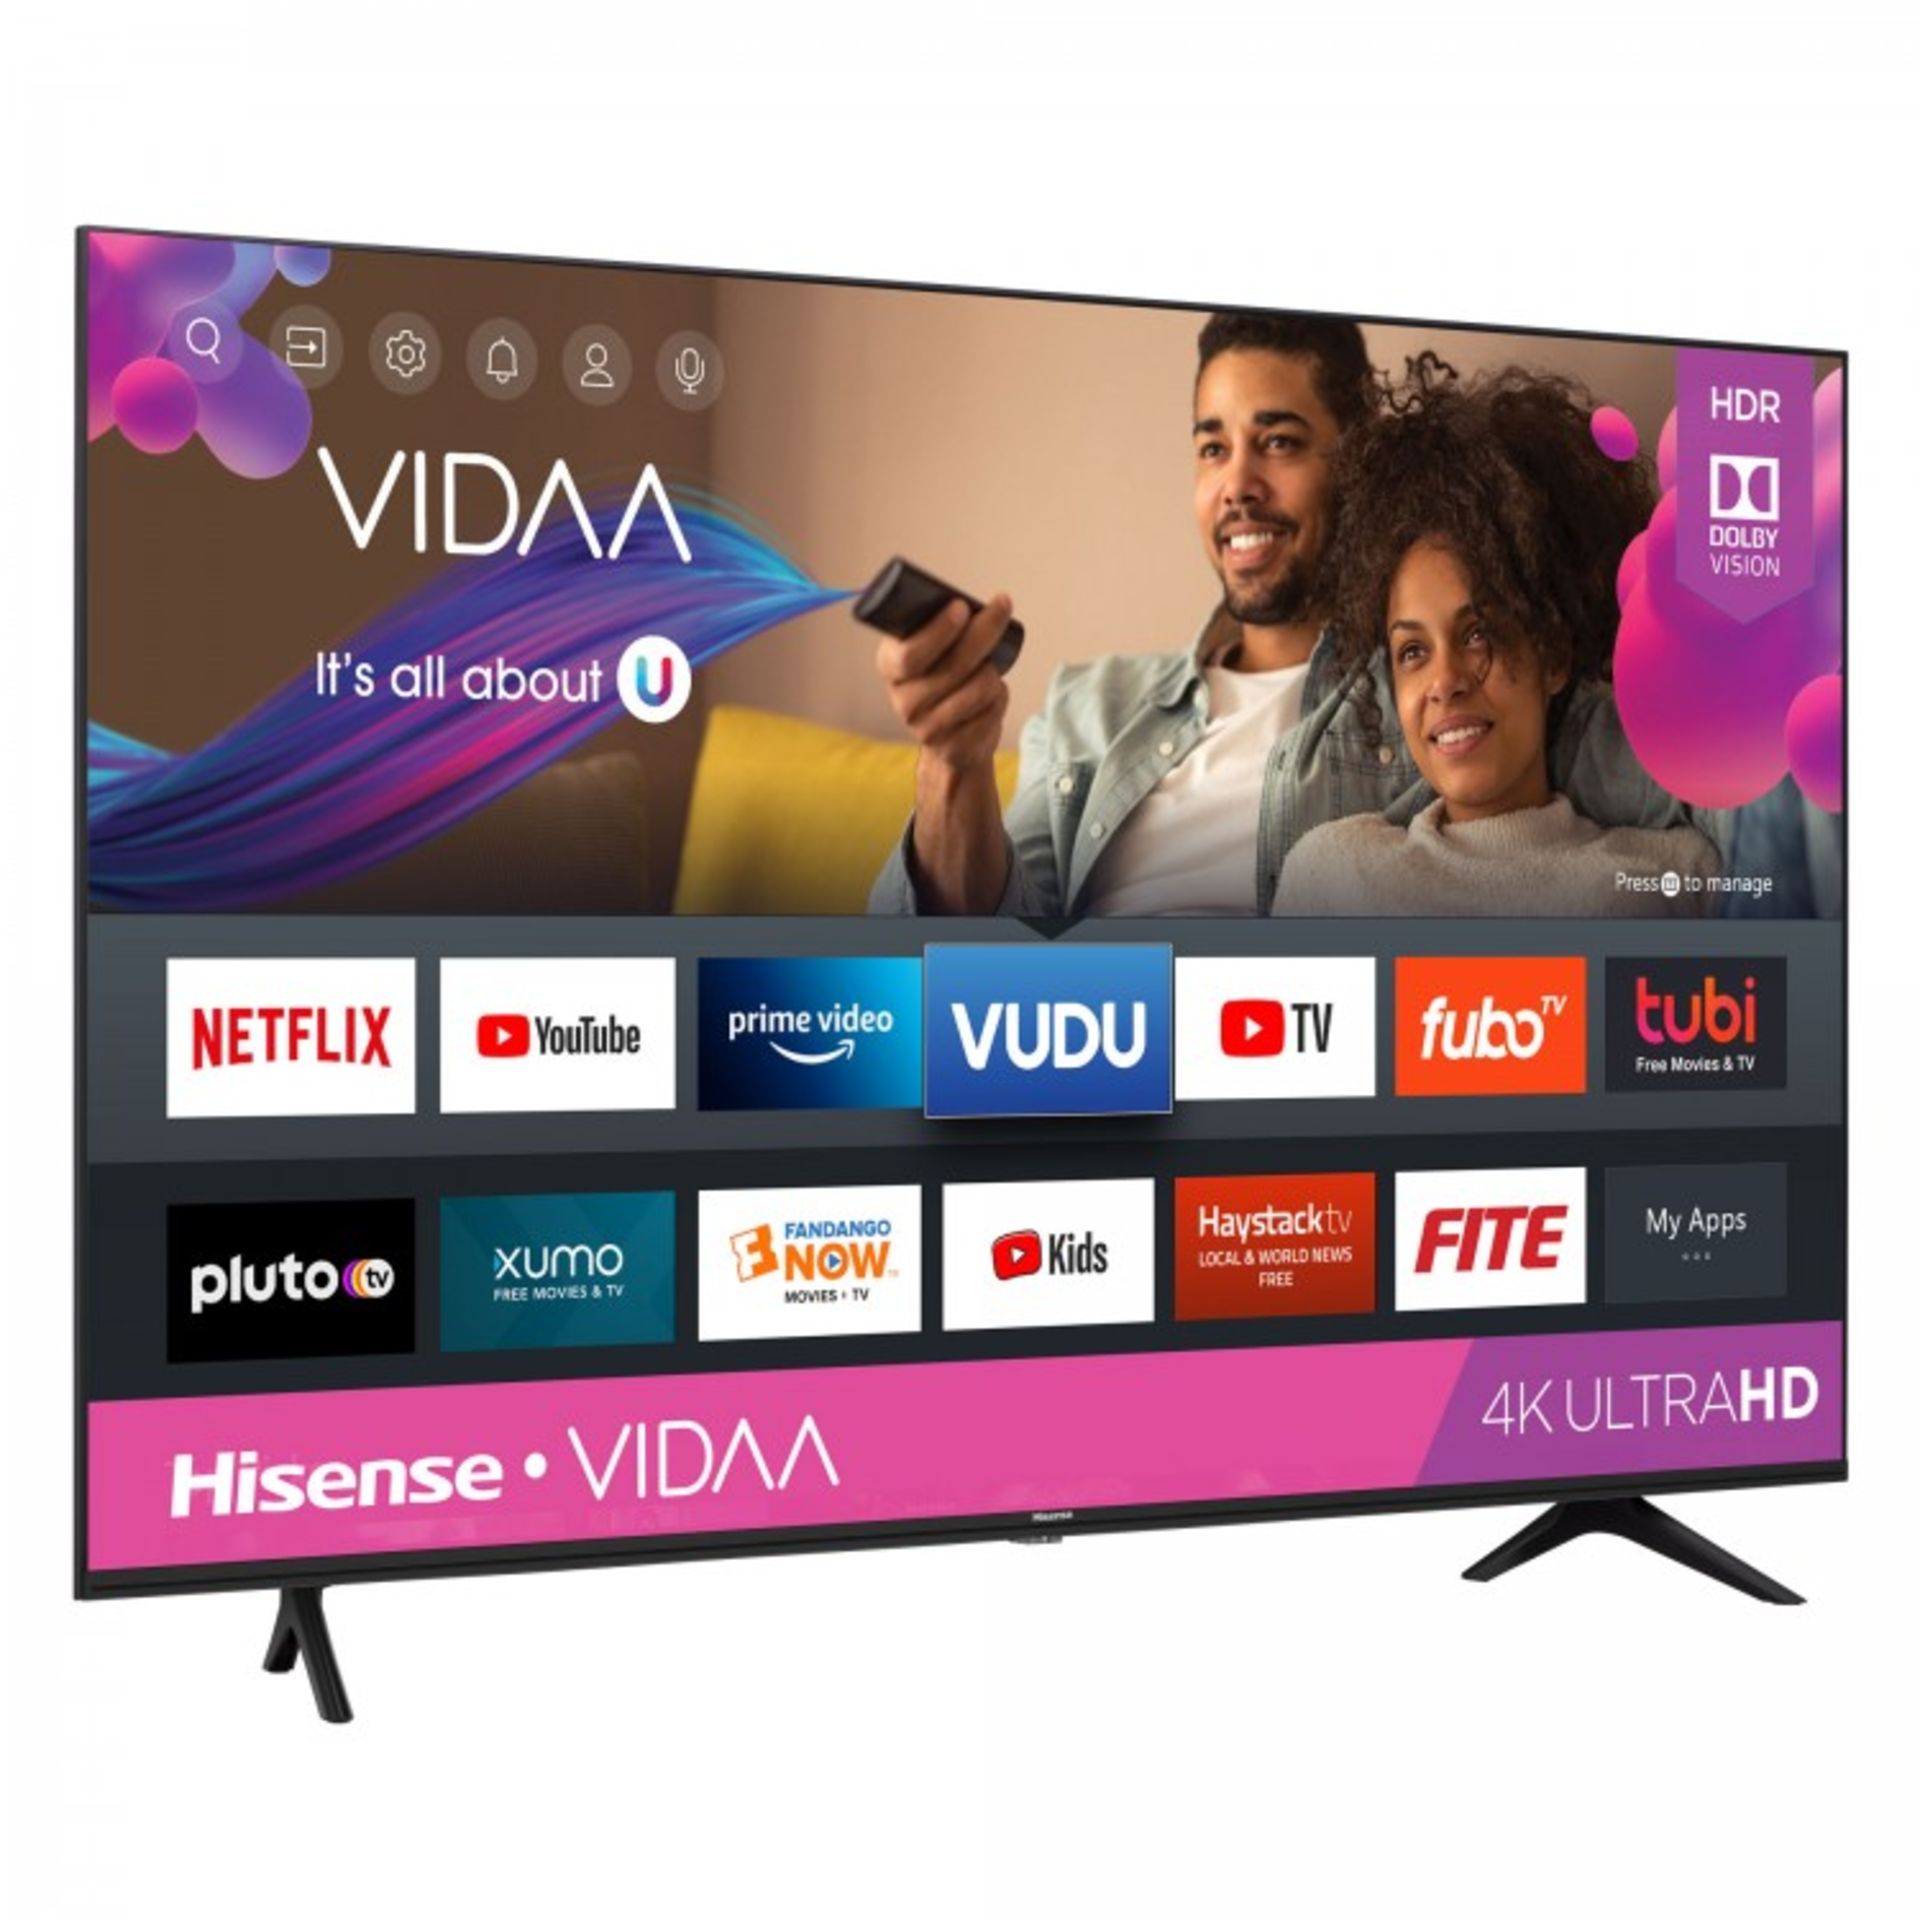 1 BOXED HISENSE 58A7100FTUK 58" SMART 4K ULTRA HD HDR LED TV WITH REMOTE AND STAND RRP Â£449 (